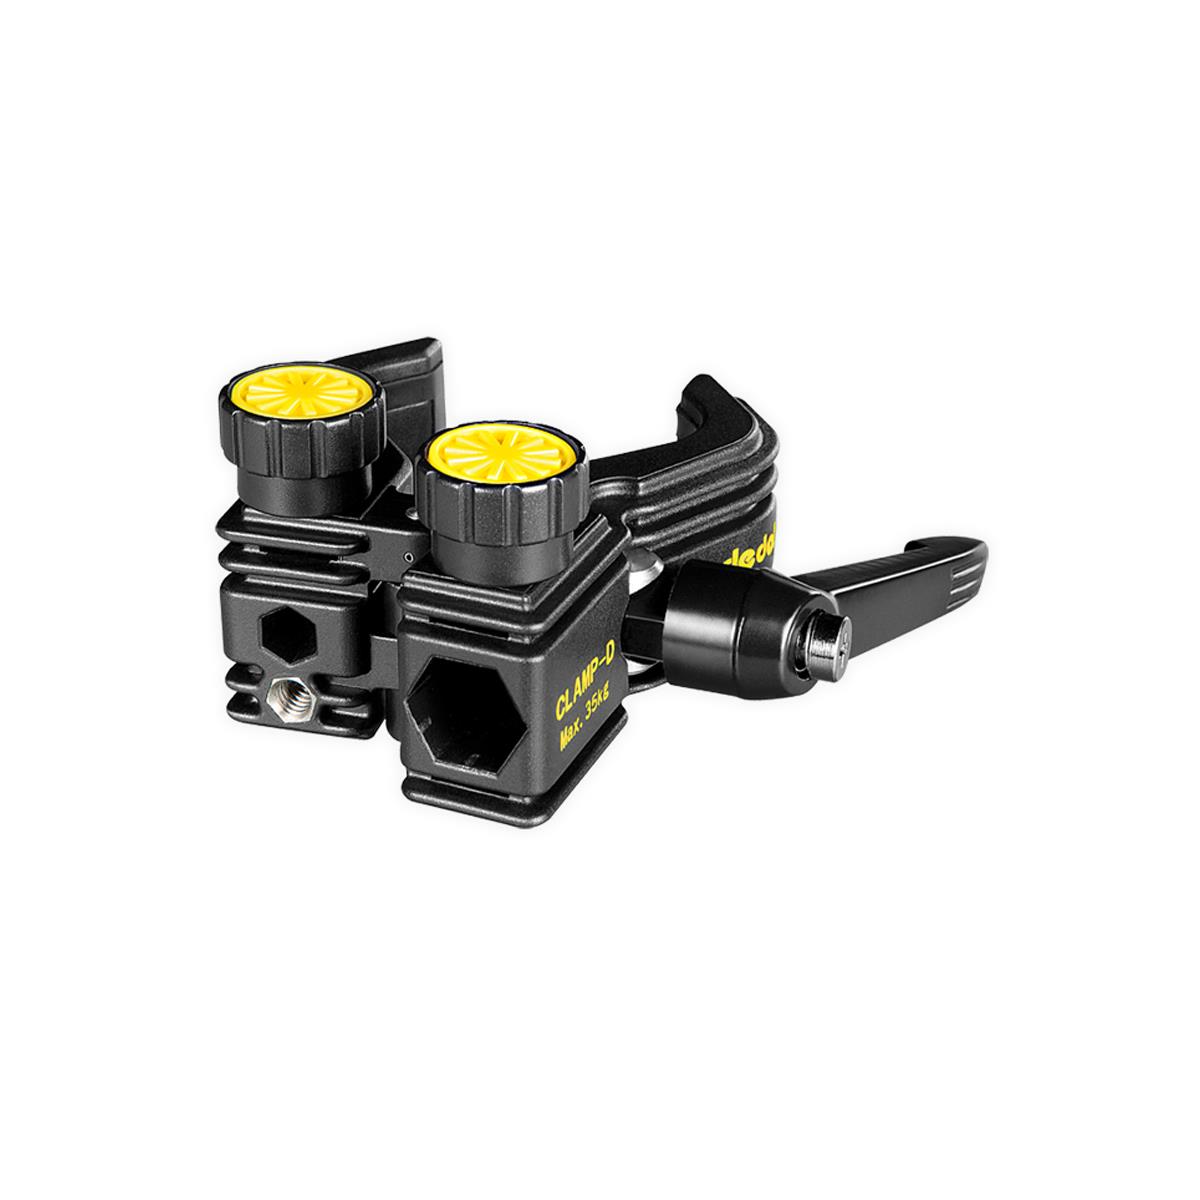 Image of Dedolight CLAMP-D High Precision Clamp